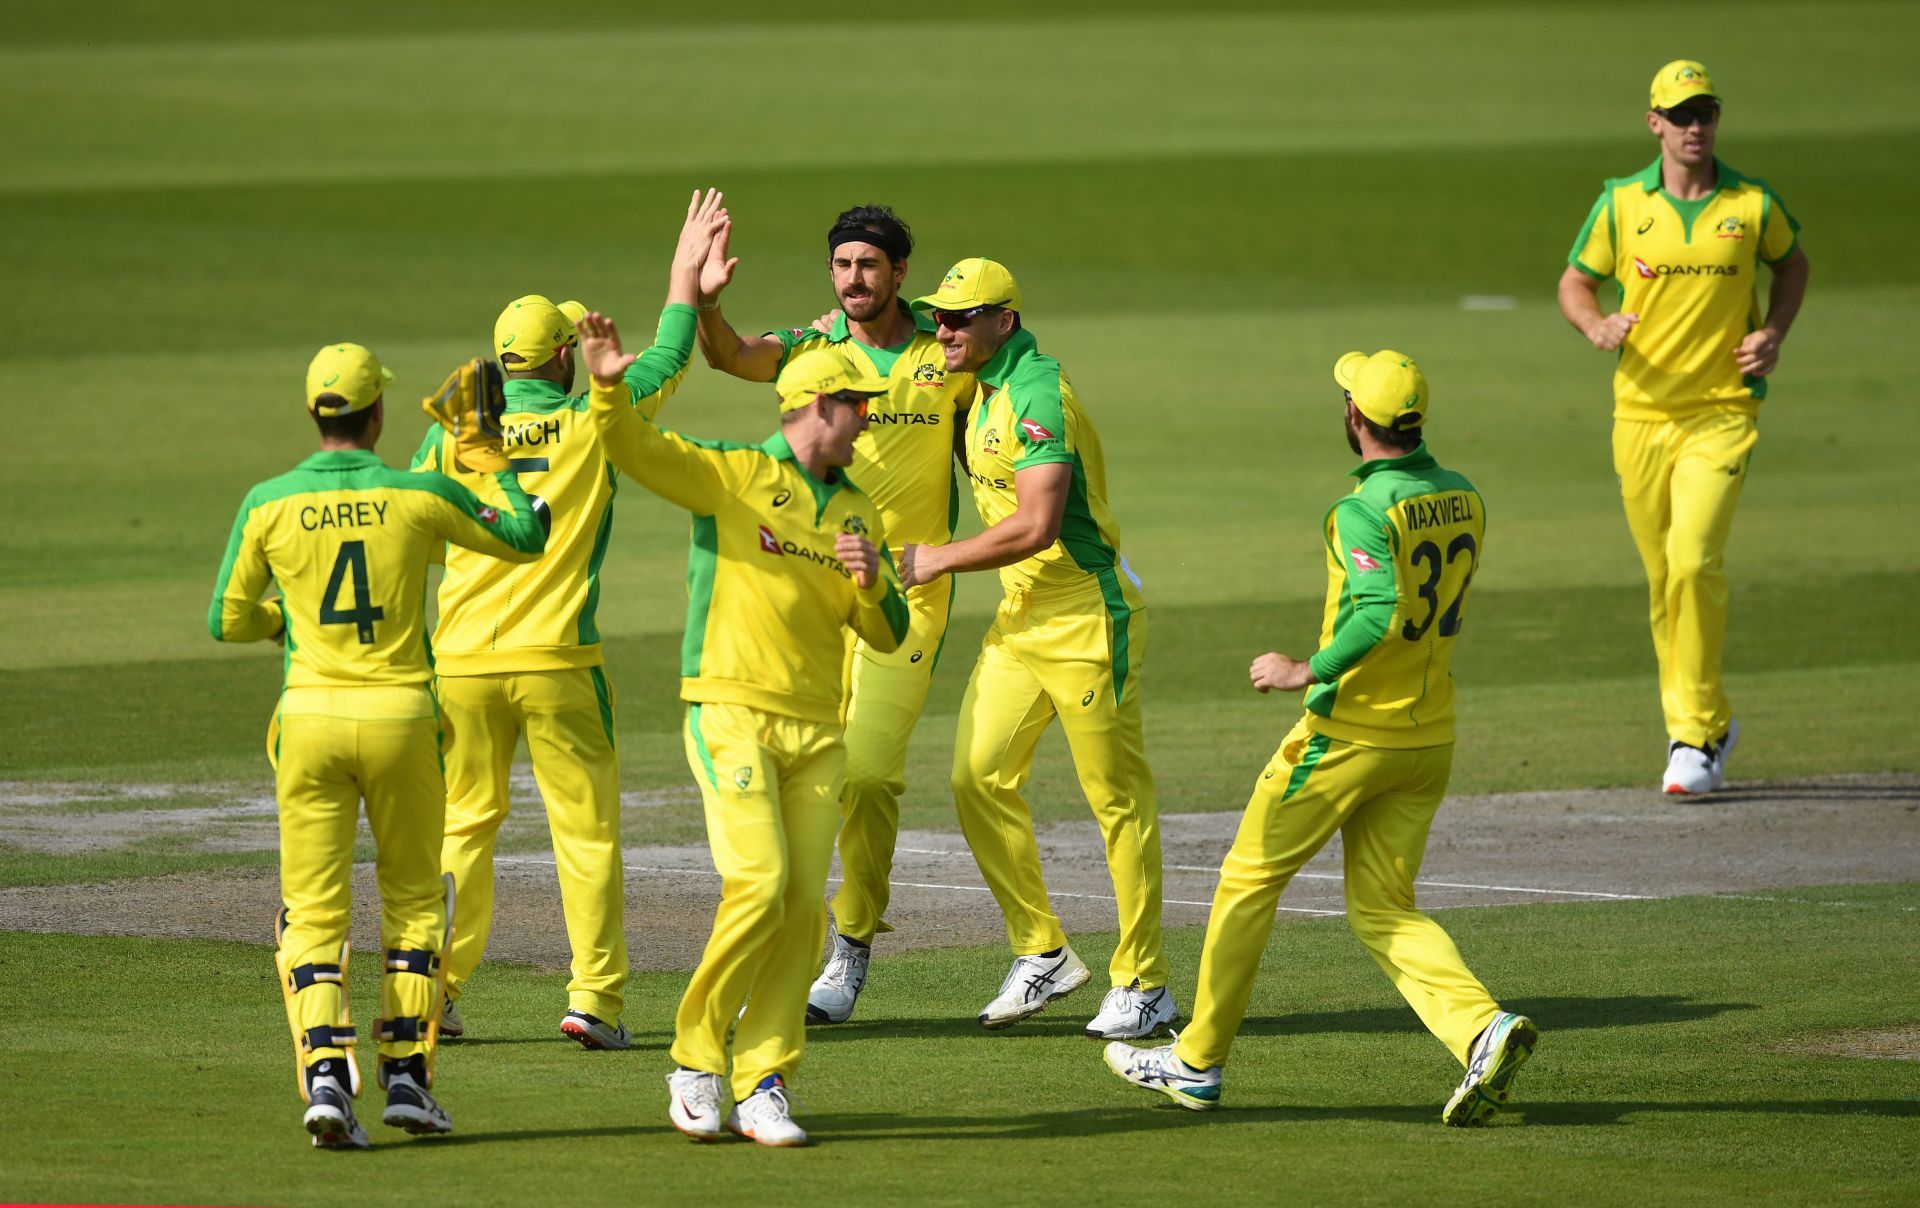 Can Australia continue their winning streak in ICC T20 World Cup 2021?